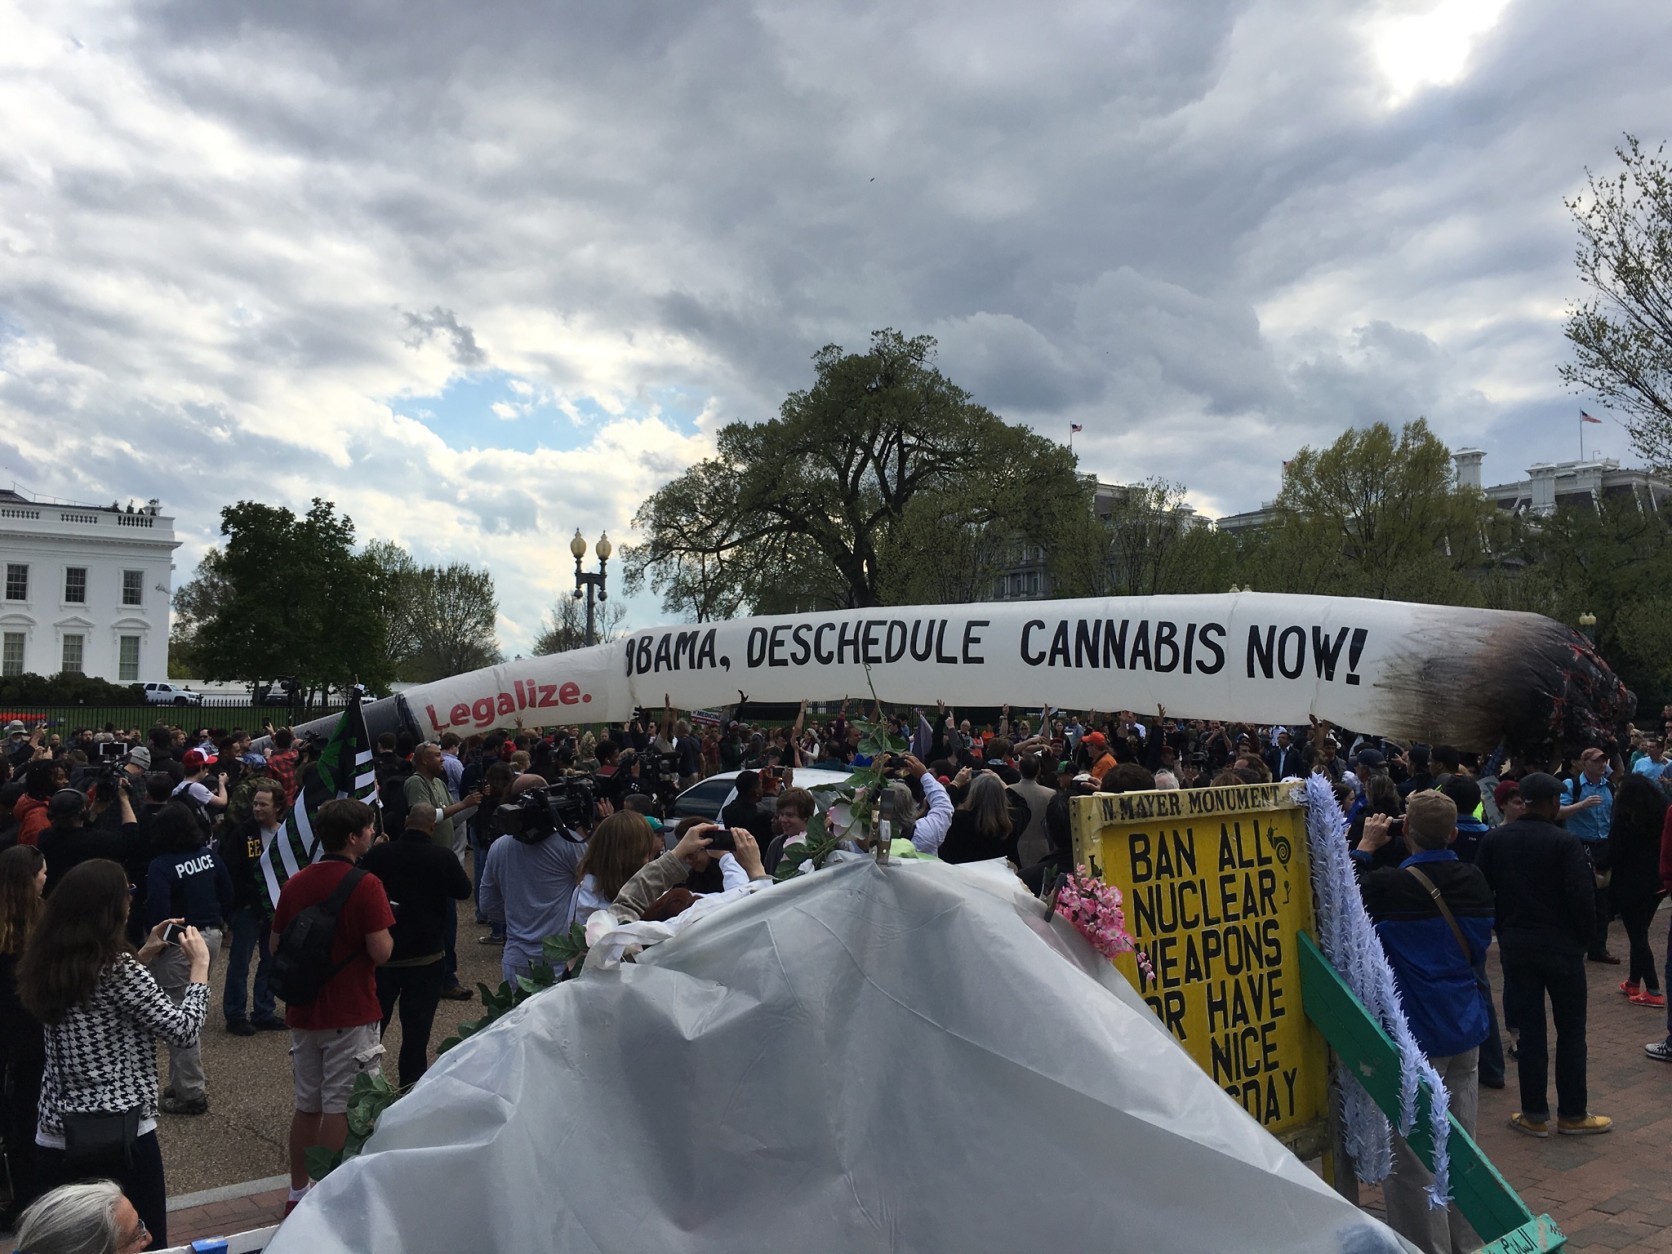 Pro-marijuana activists outside the White House on Saturday, March 2, 2016 were ordered by police to fold up this 51-foot inflatable "joint," due to a security risk. (Photo courtesy Josh Godaire)